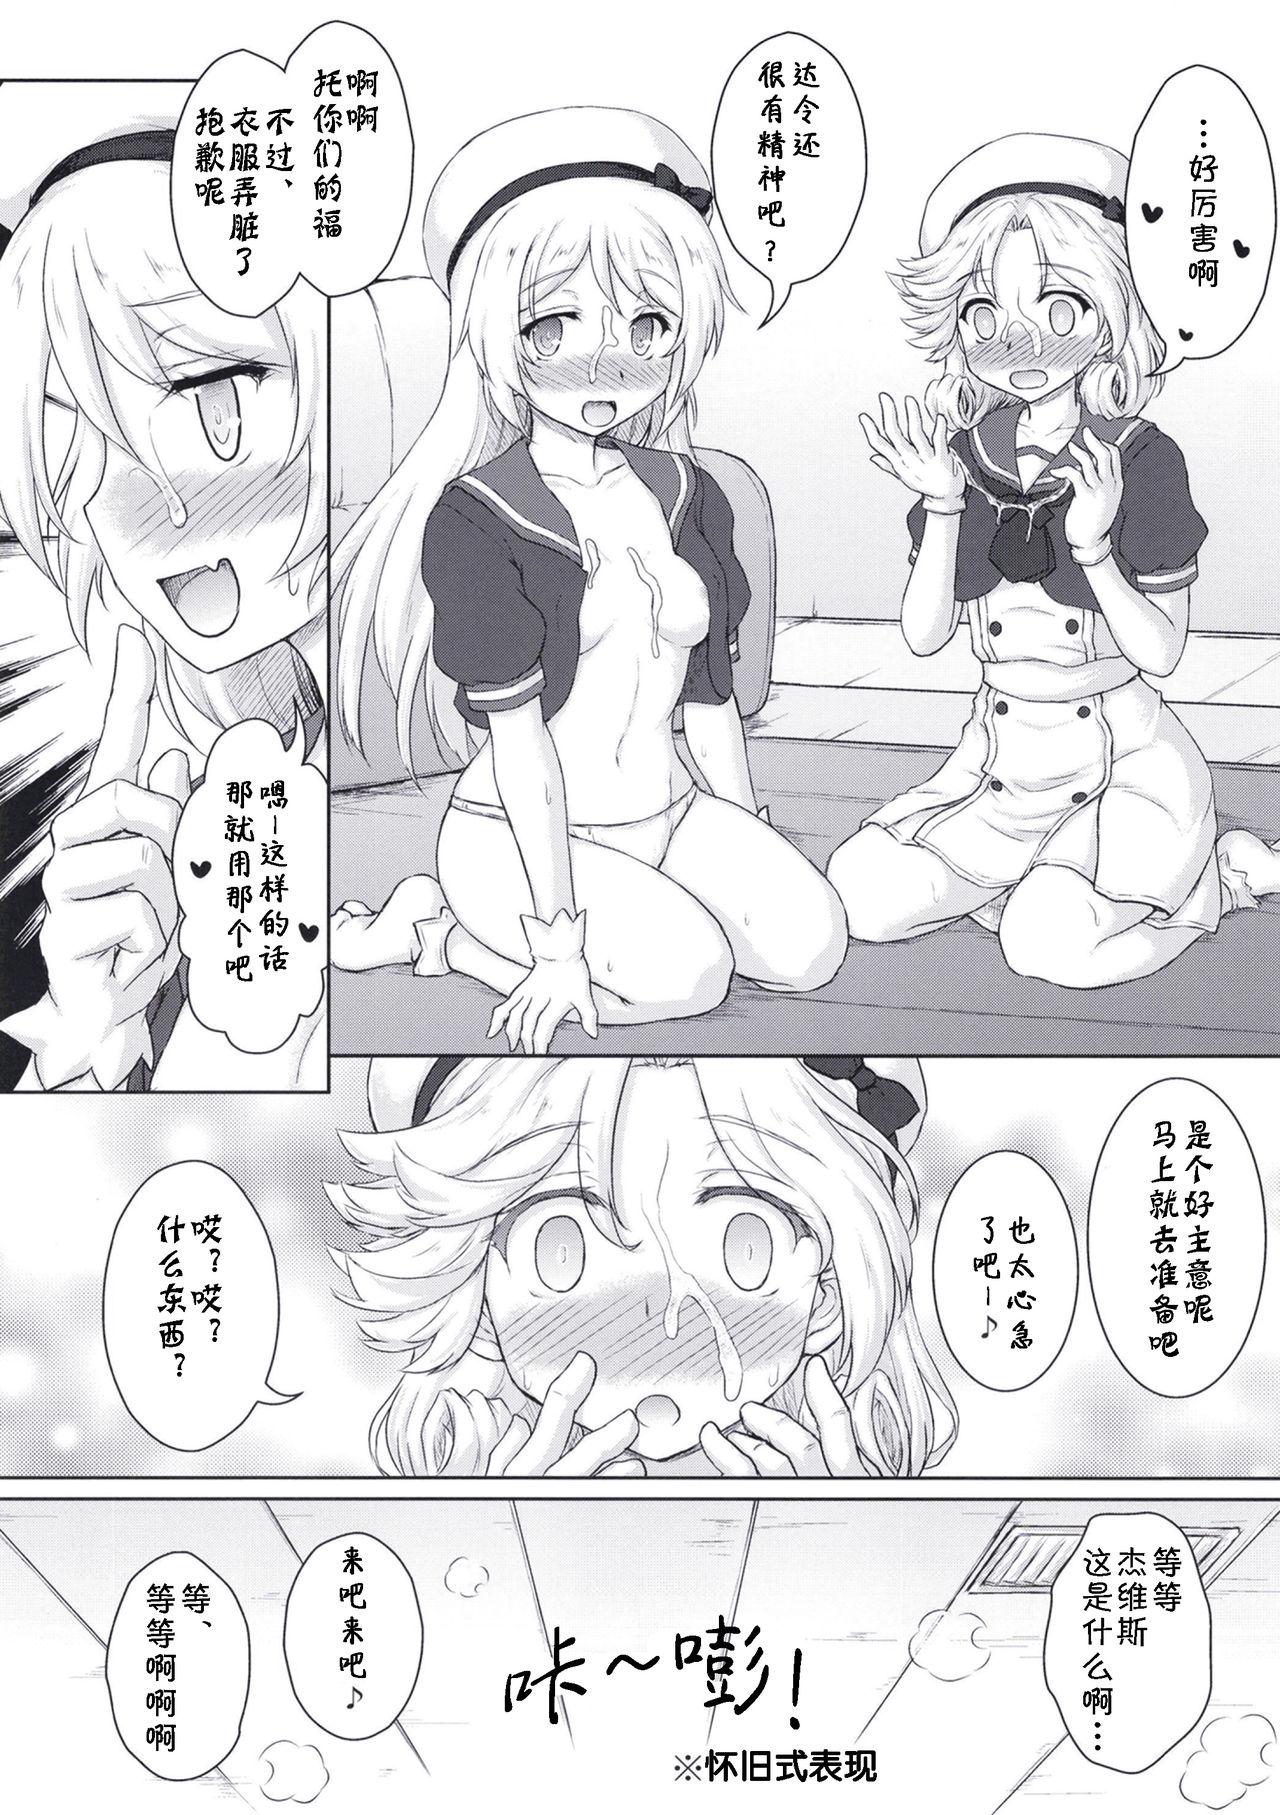 Banging Darling is in sight! act2 - Kantai collection Rabo - Page 12